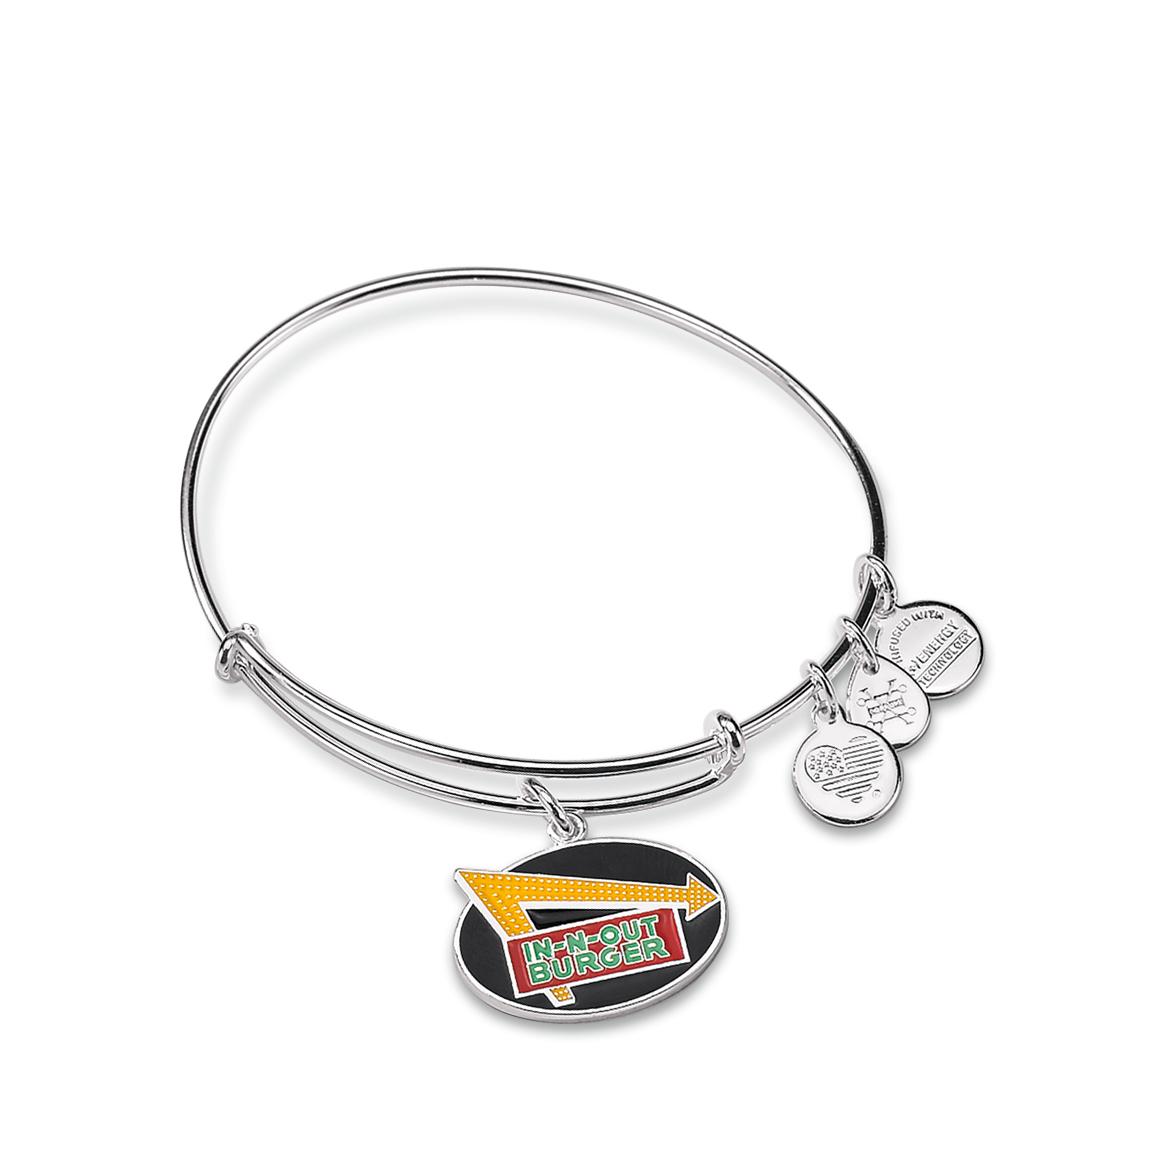 This $8 charm bracelet low-key looks just like the Alex and Ani one